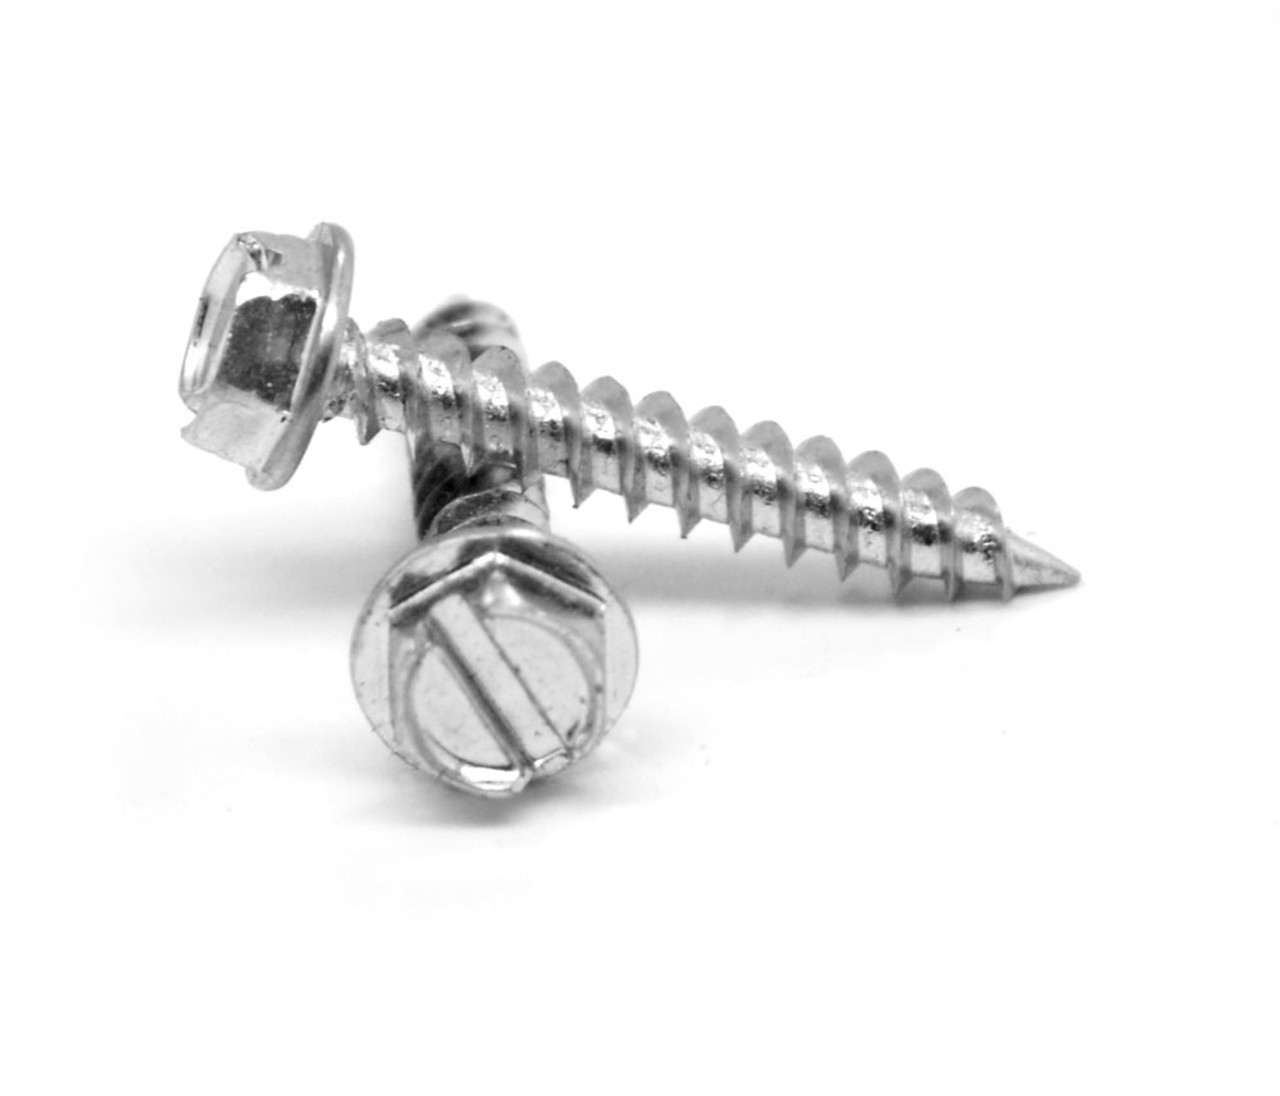 1/4-10 x 3 Self-Piercing Sheet Metal Screw Slotted Hex Washer 3/8AF Head Low Carbon Steel Zinc Plated